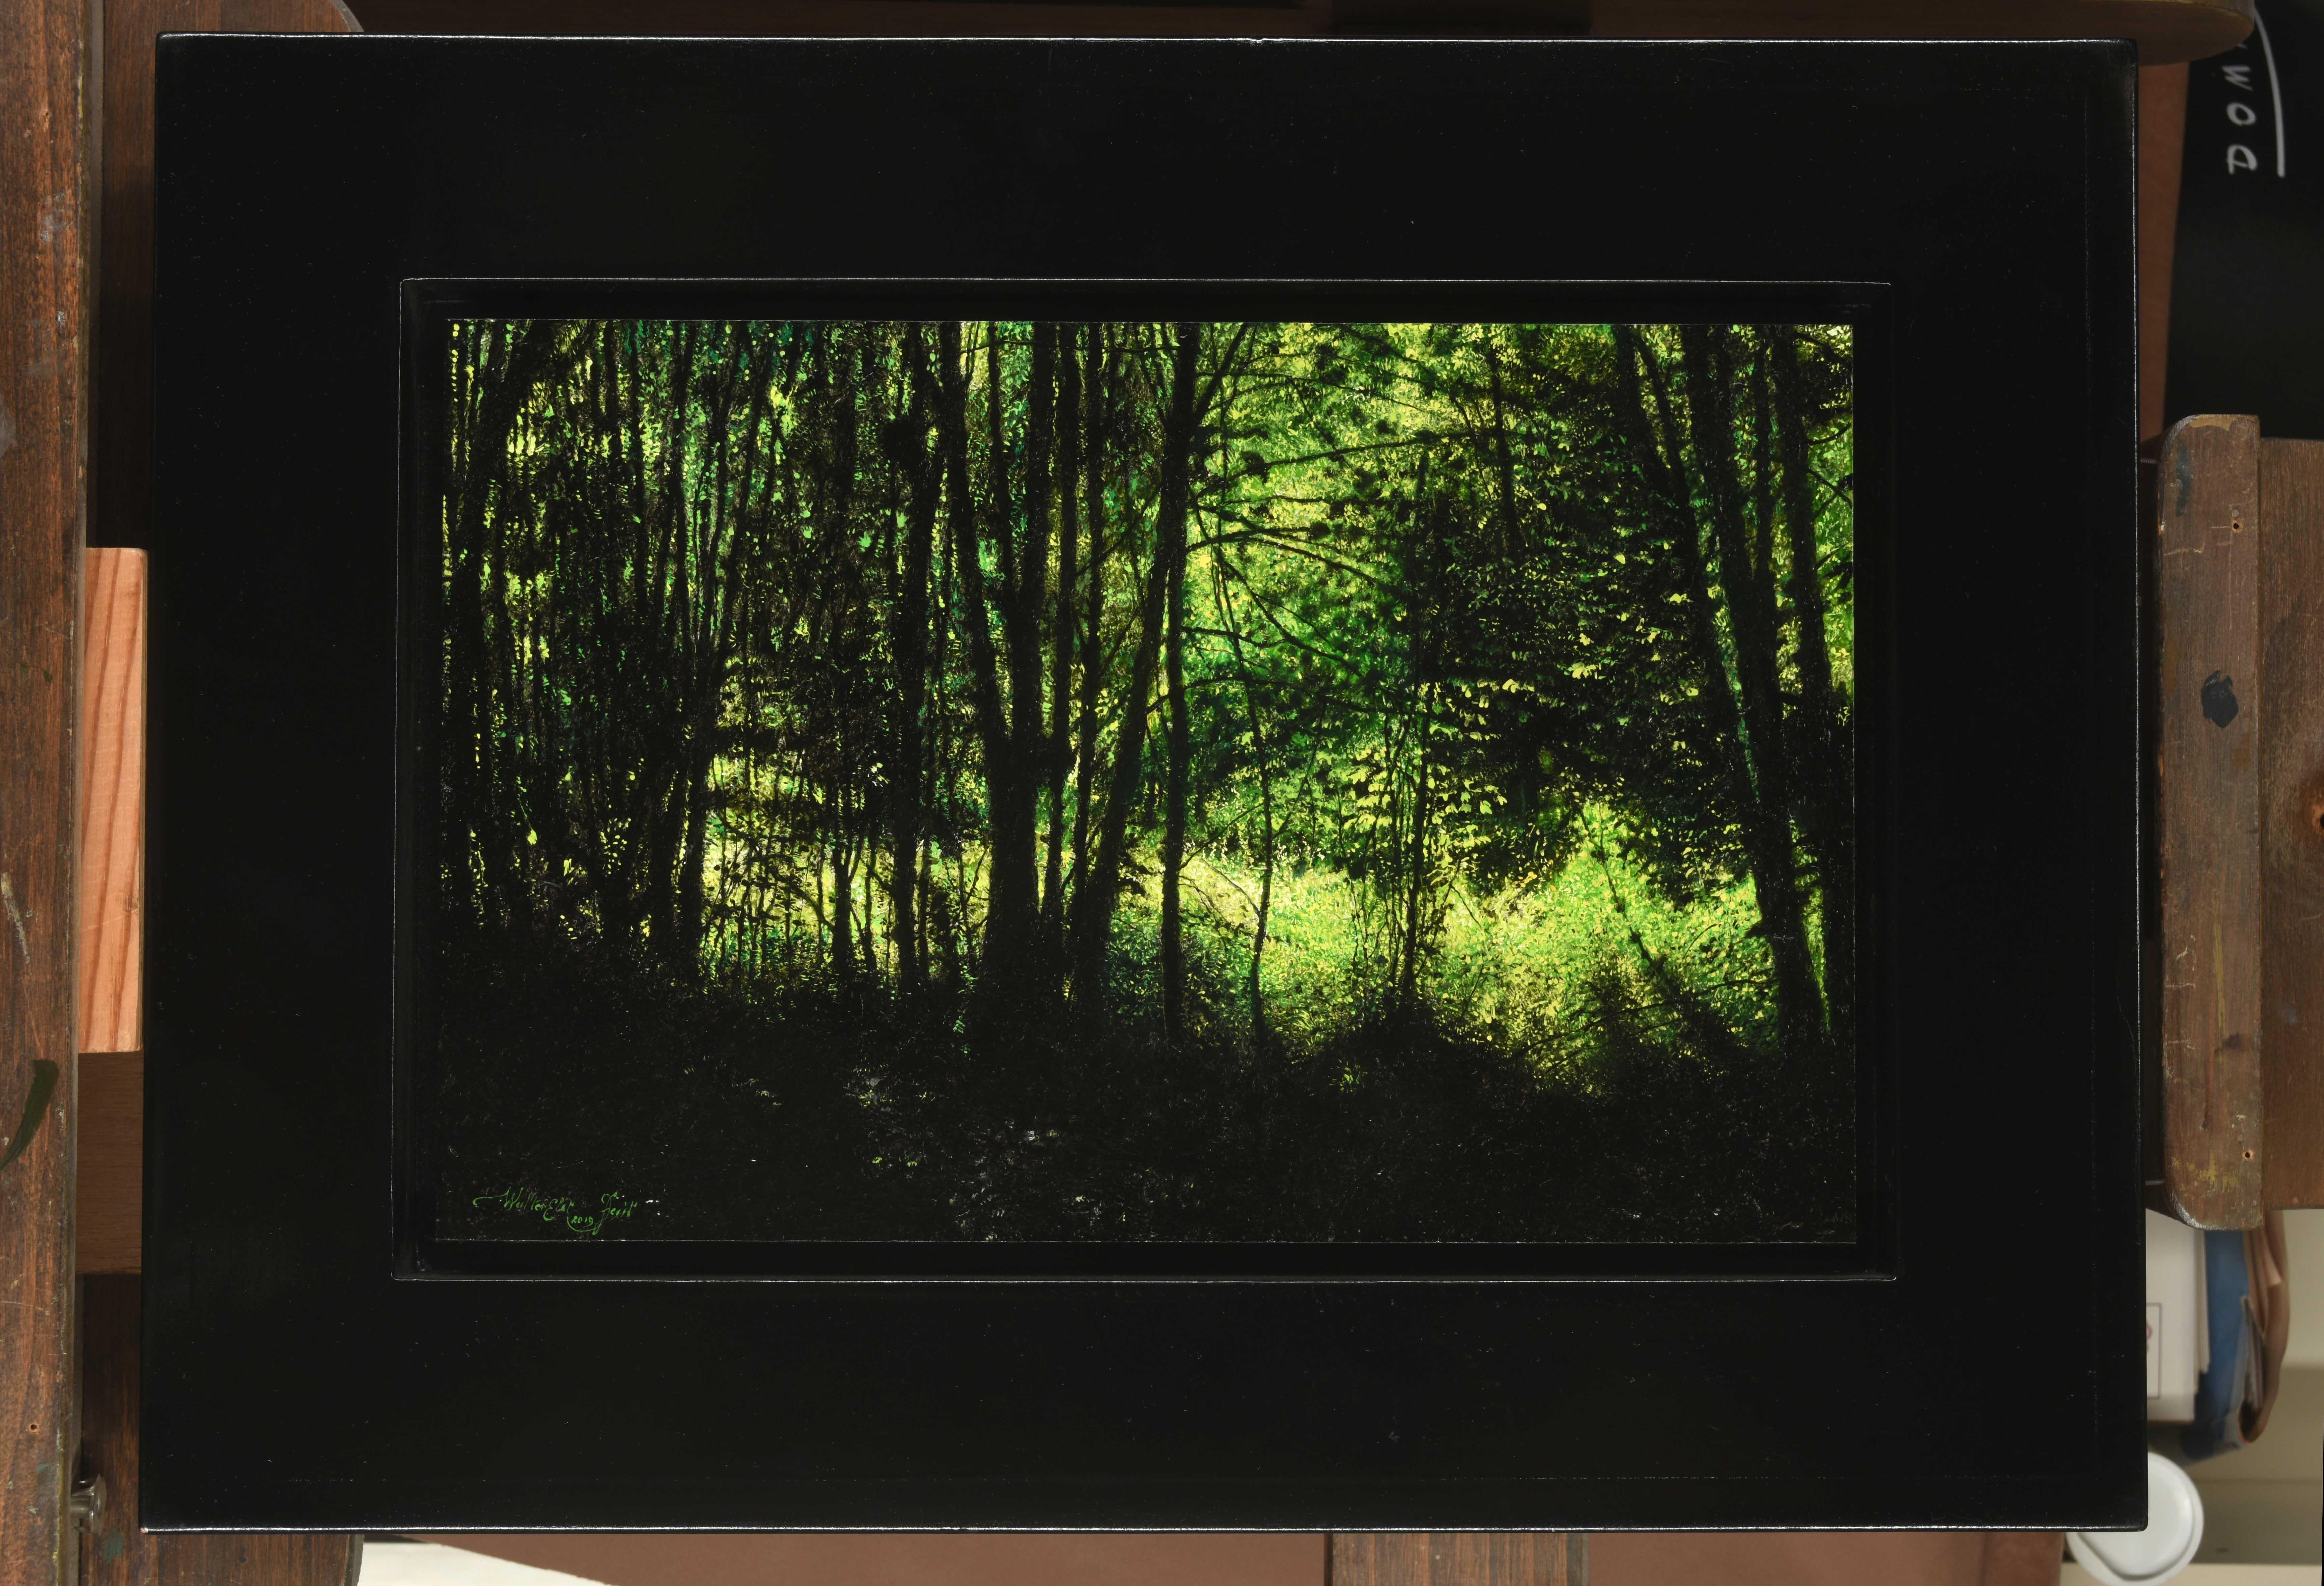 Diep in het Bos Far in the Woods Oil Painting on Wood Panel Nature In Stock - Black Landscape Painting by Walter Elst